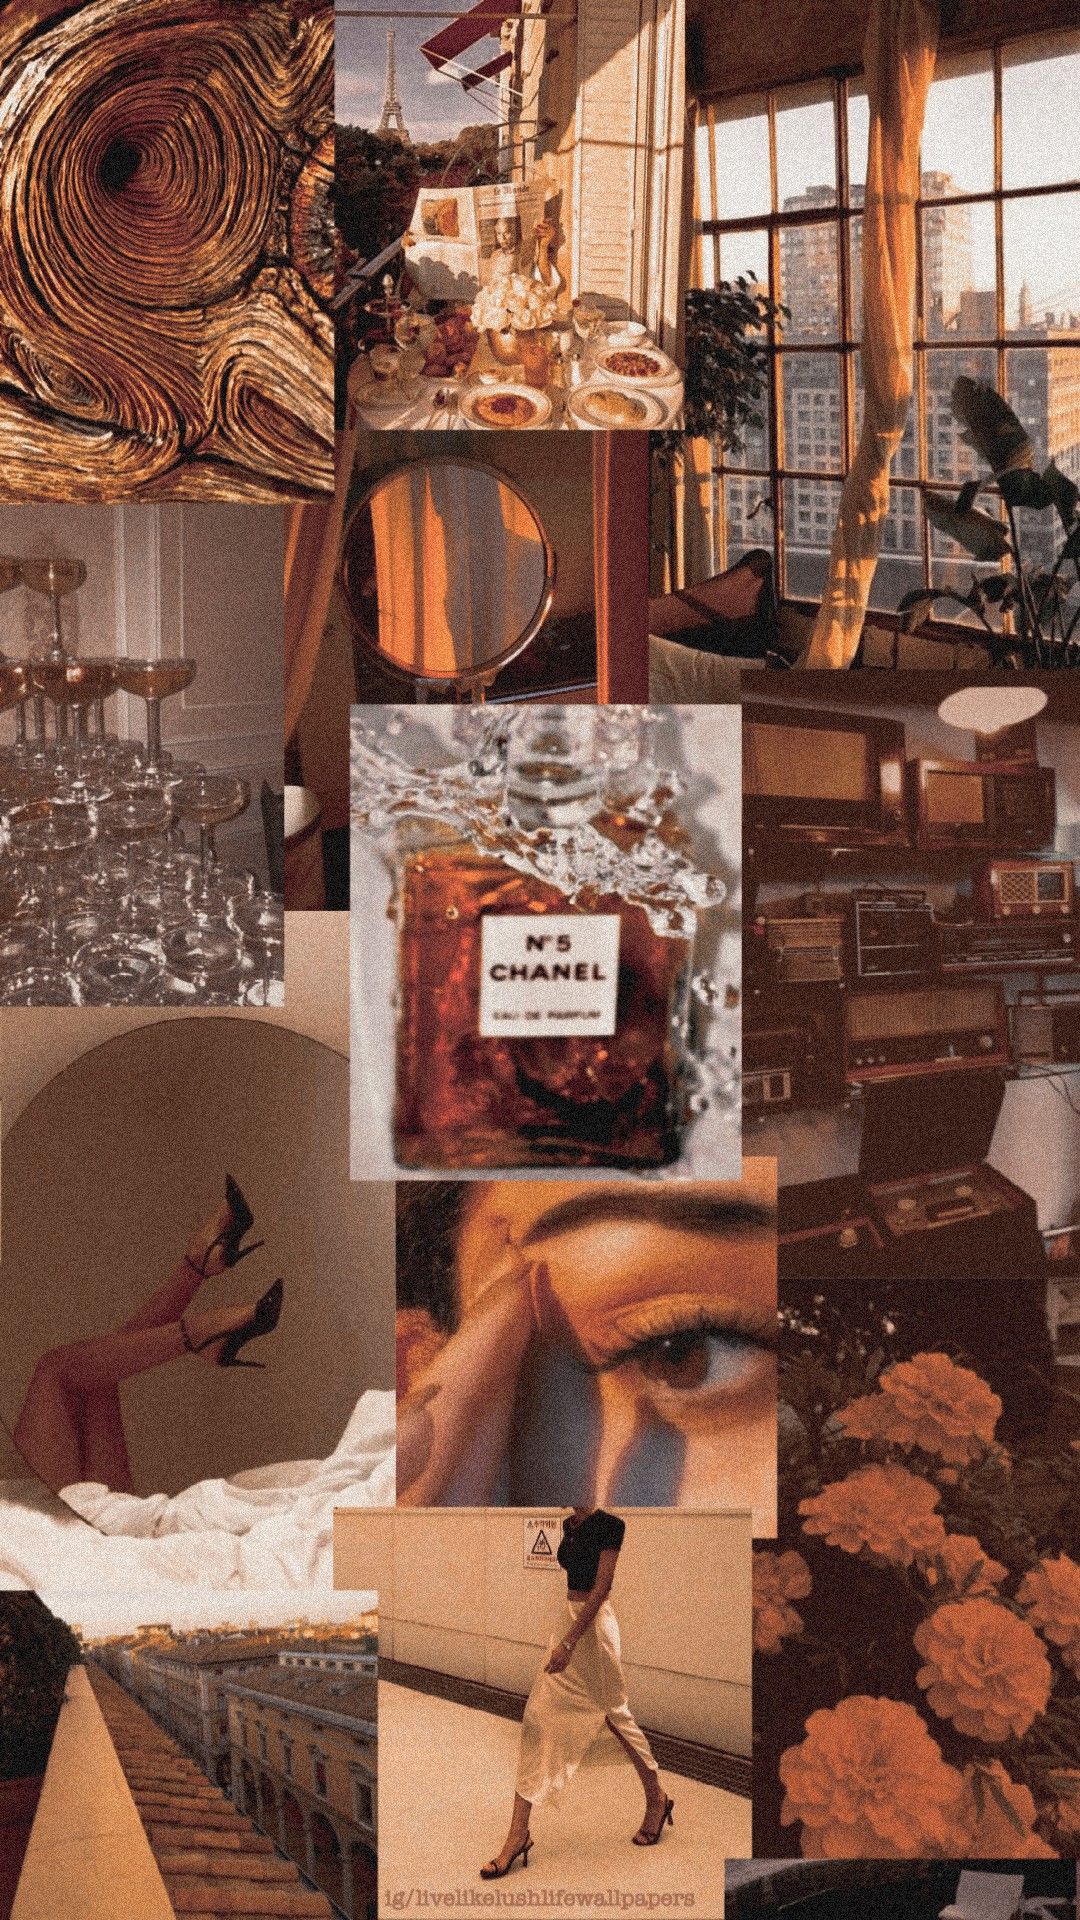 Aesthetic collage with vintage elements and brown colors - Chanel